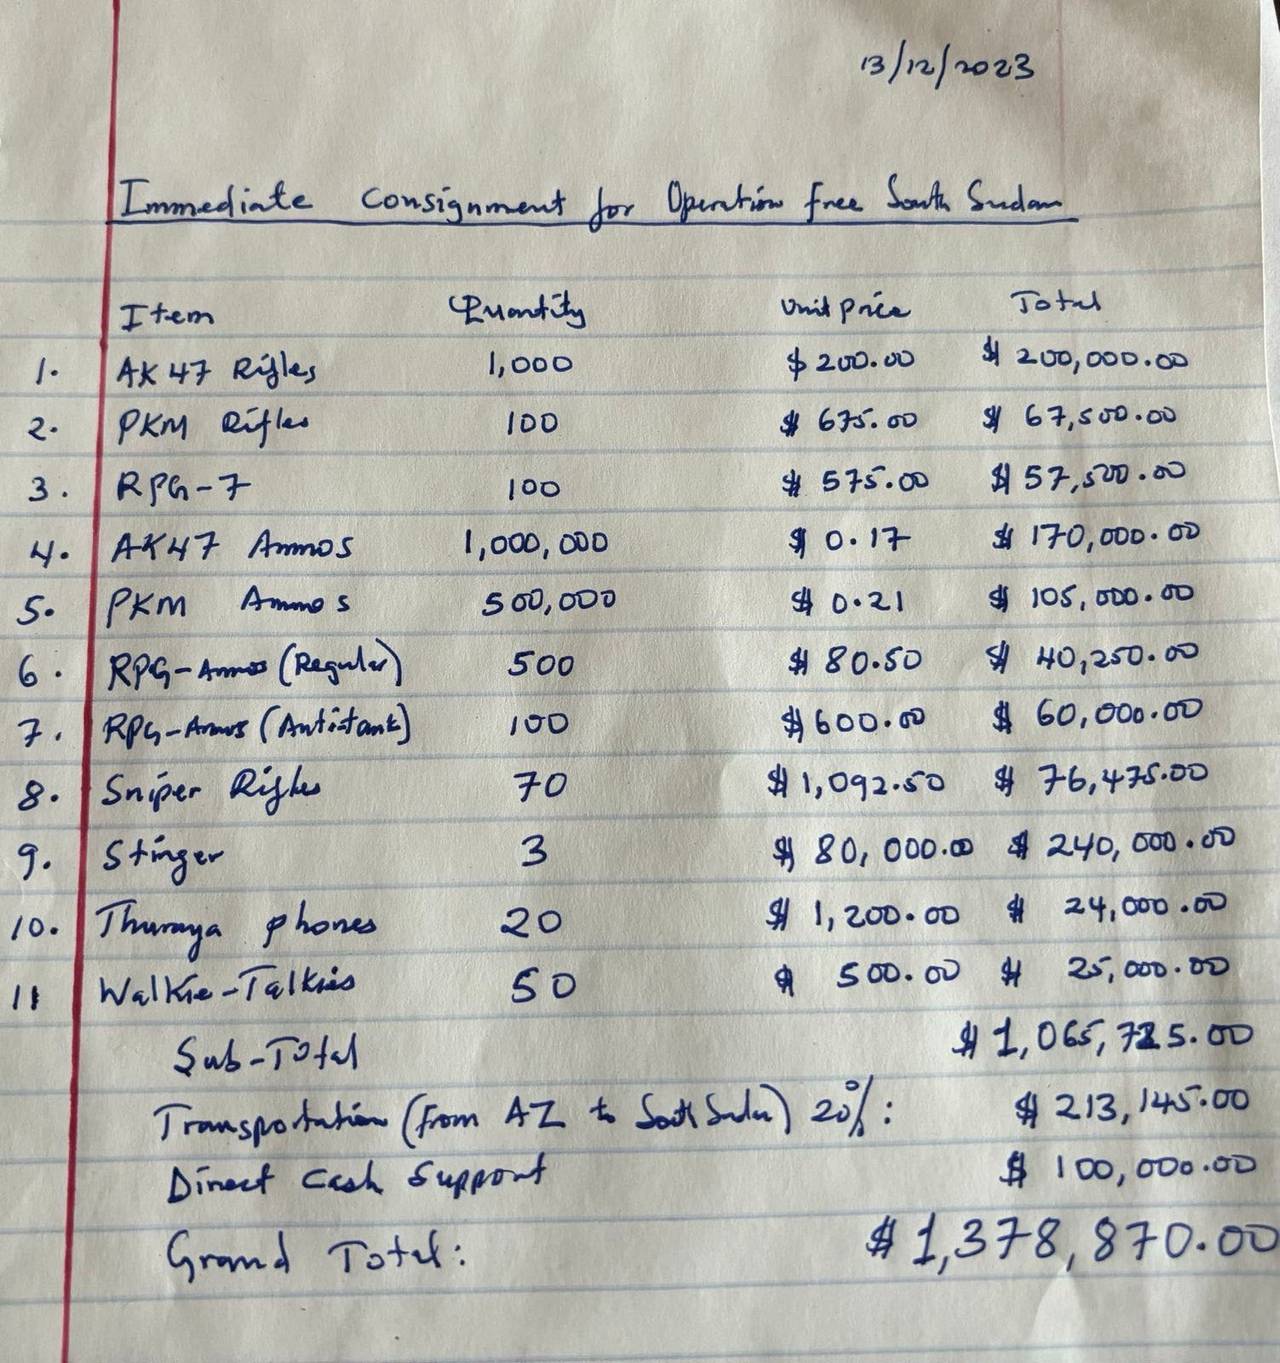 Photograph of piece of ruled paper with handwritten consignment order for weapons with individual and total prices.